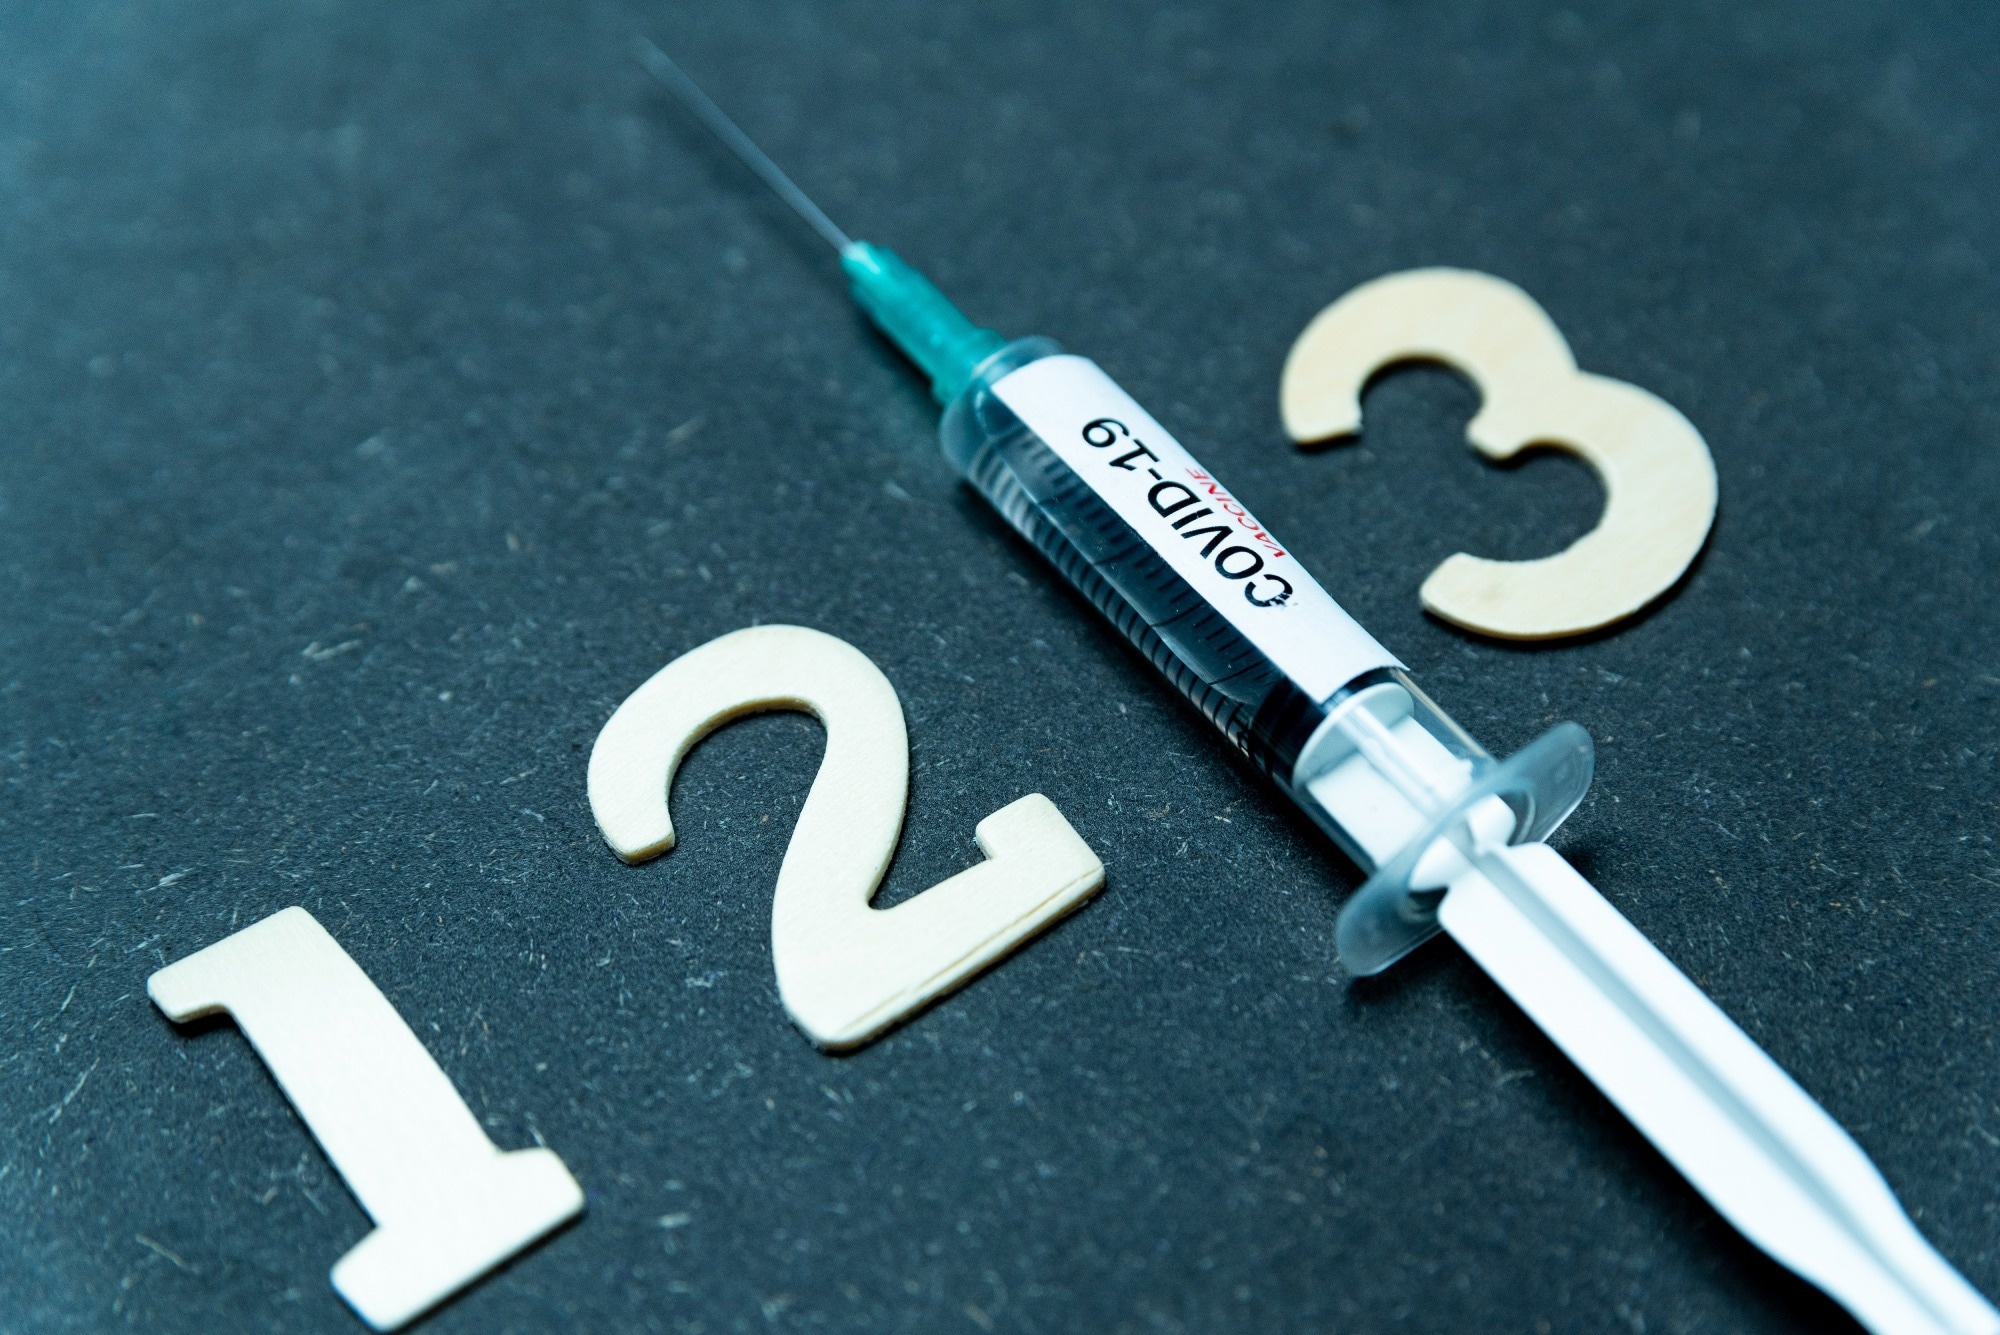 Study: Association of Primary and Booster Vaccination and Prior Infection With SARS-CoV-2 Infection and Severe COVID-19 Outcomes. Image Credit: davide bonaldo/Shutterstock